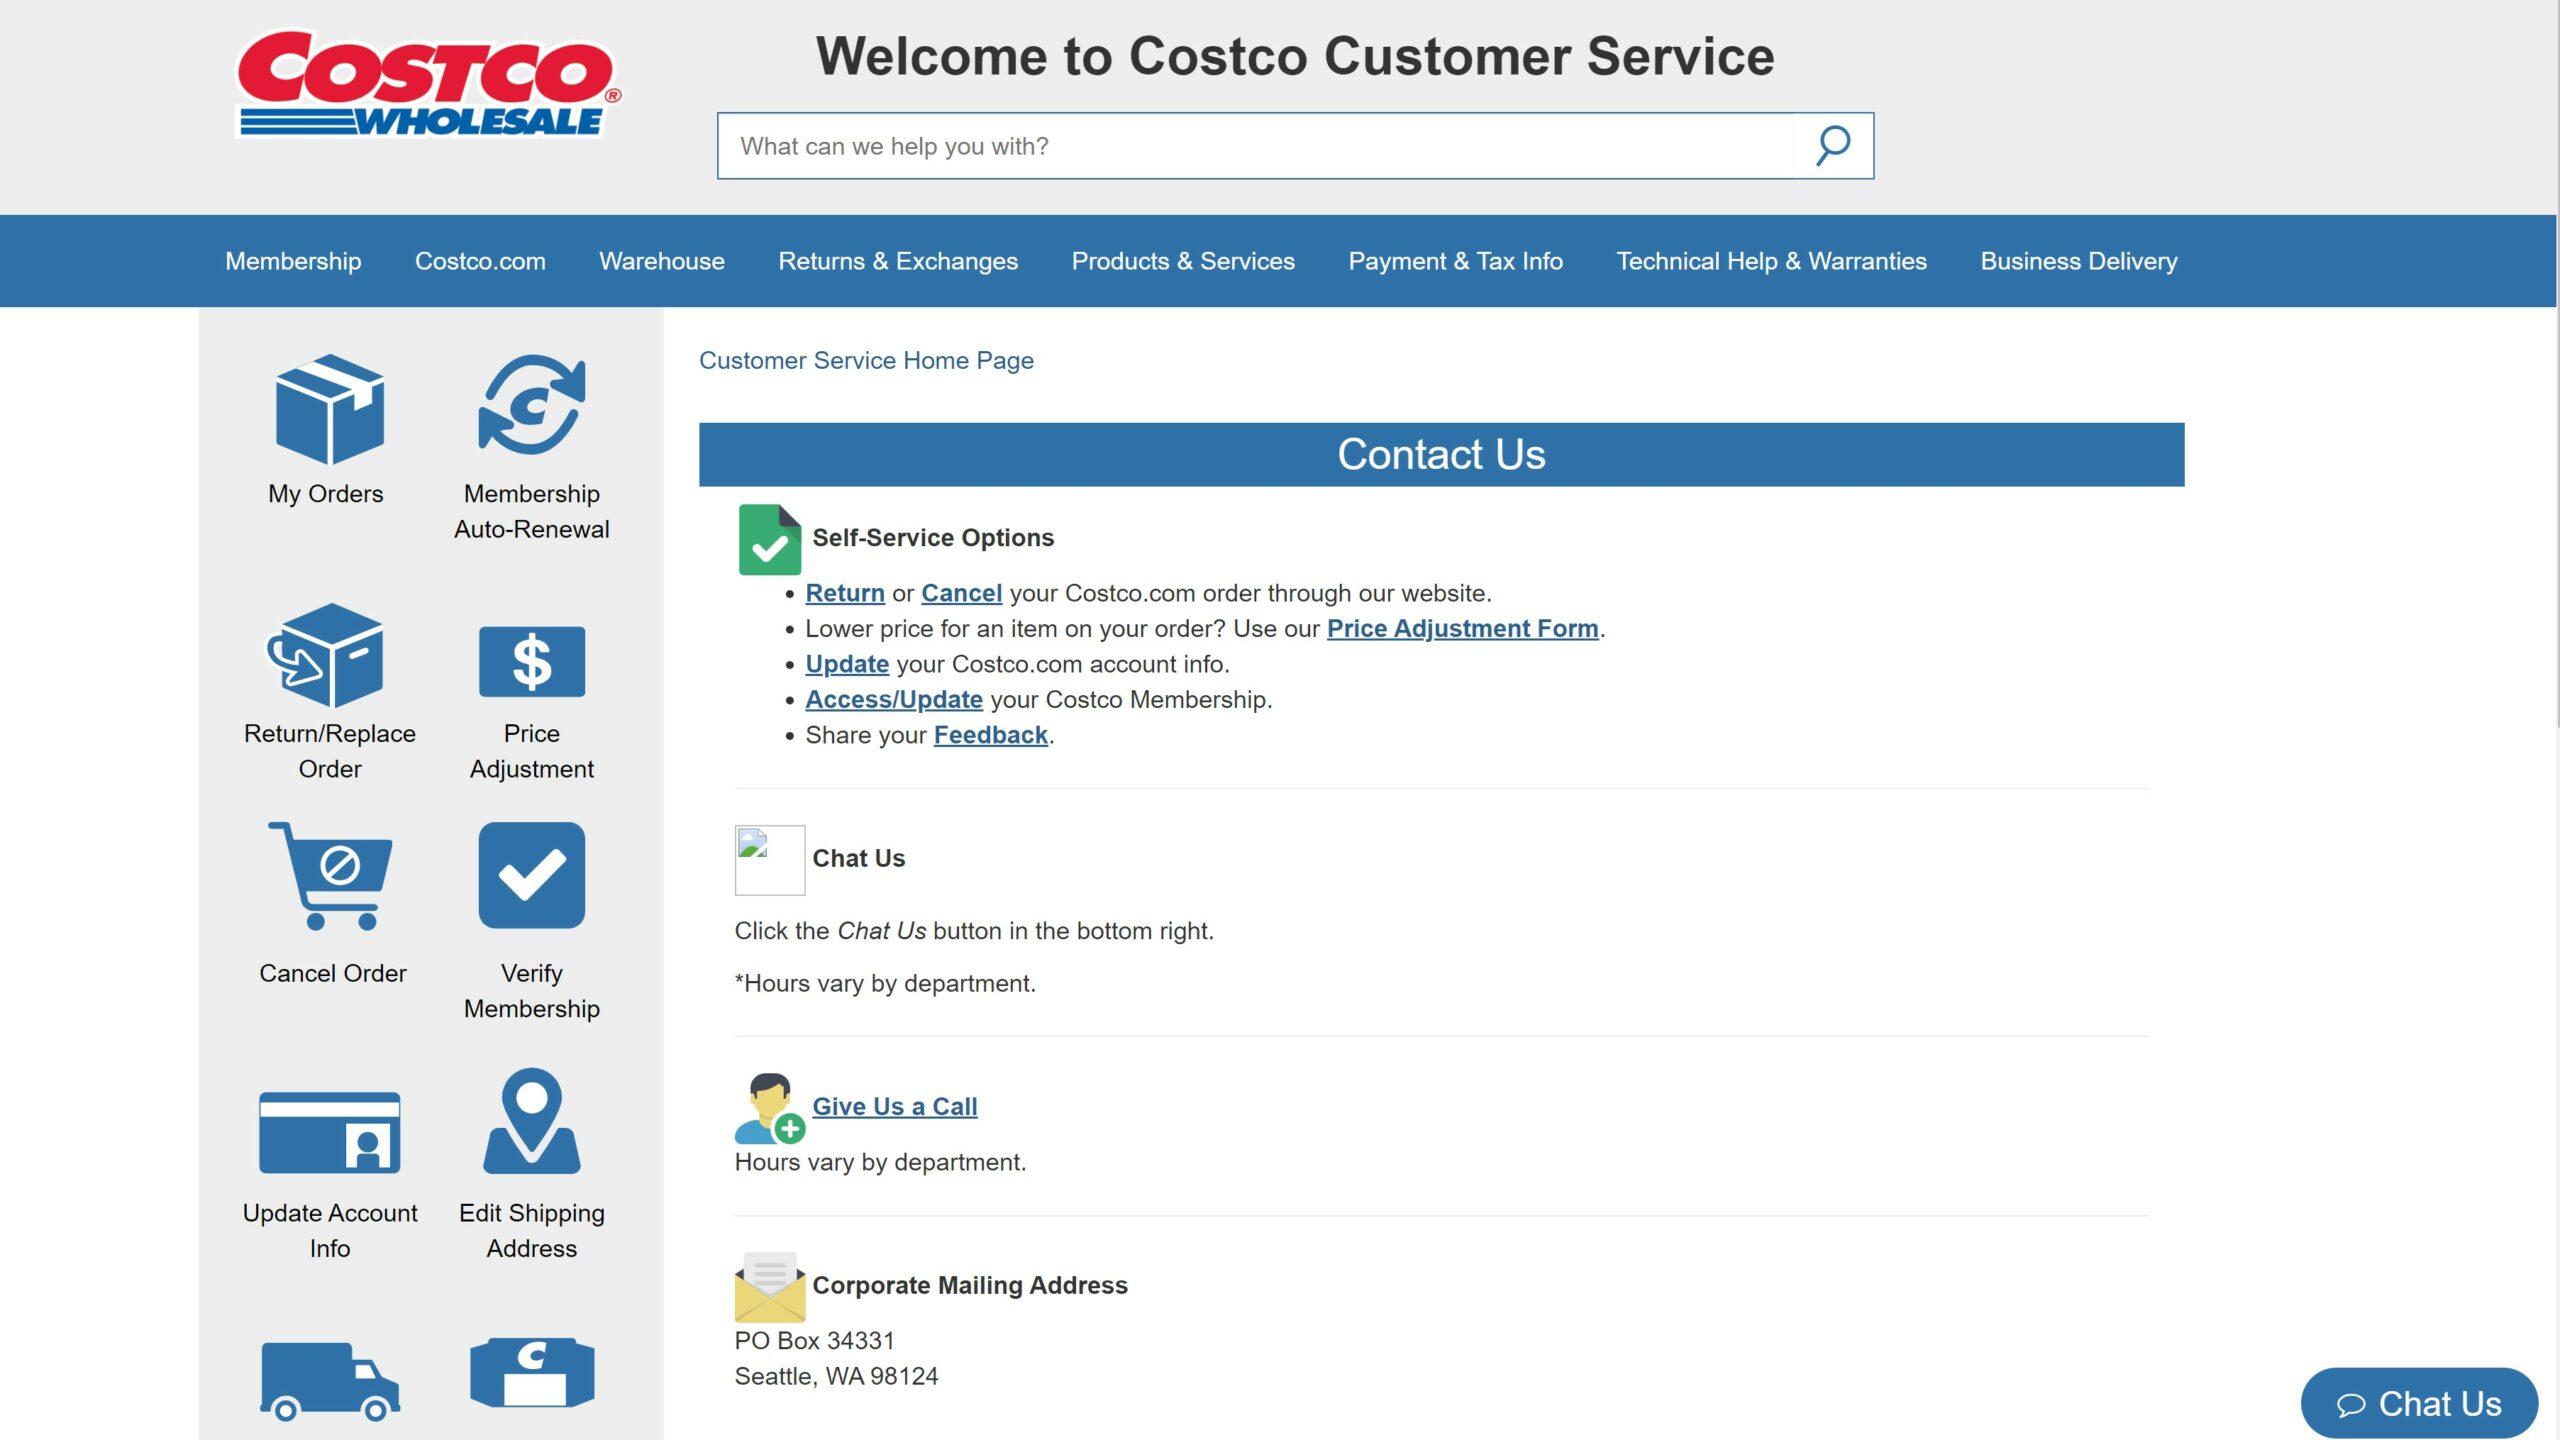 Costco contact us page